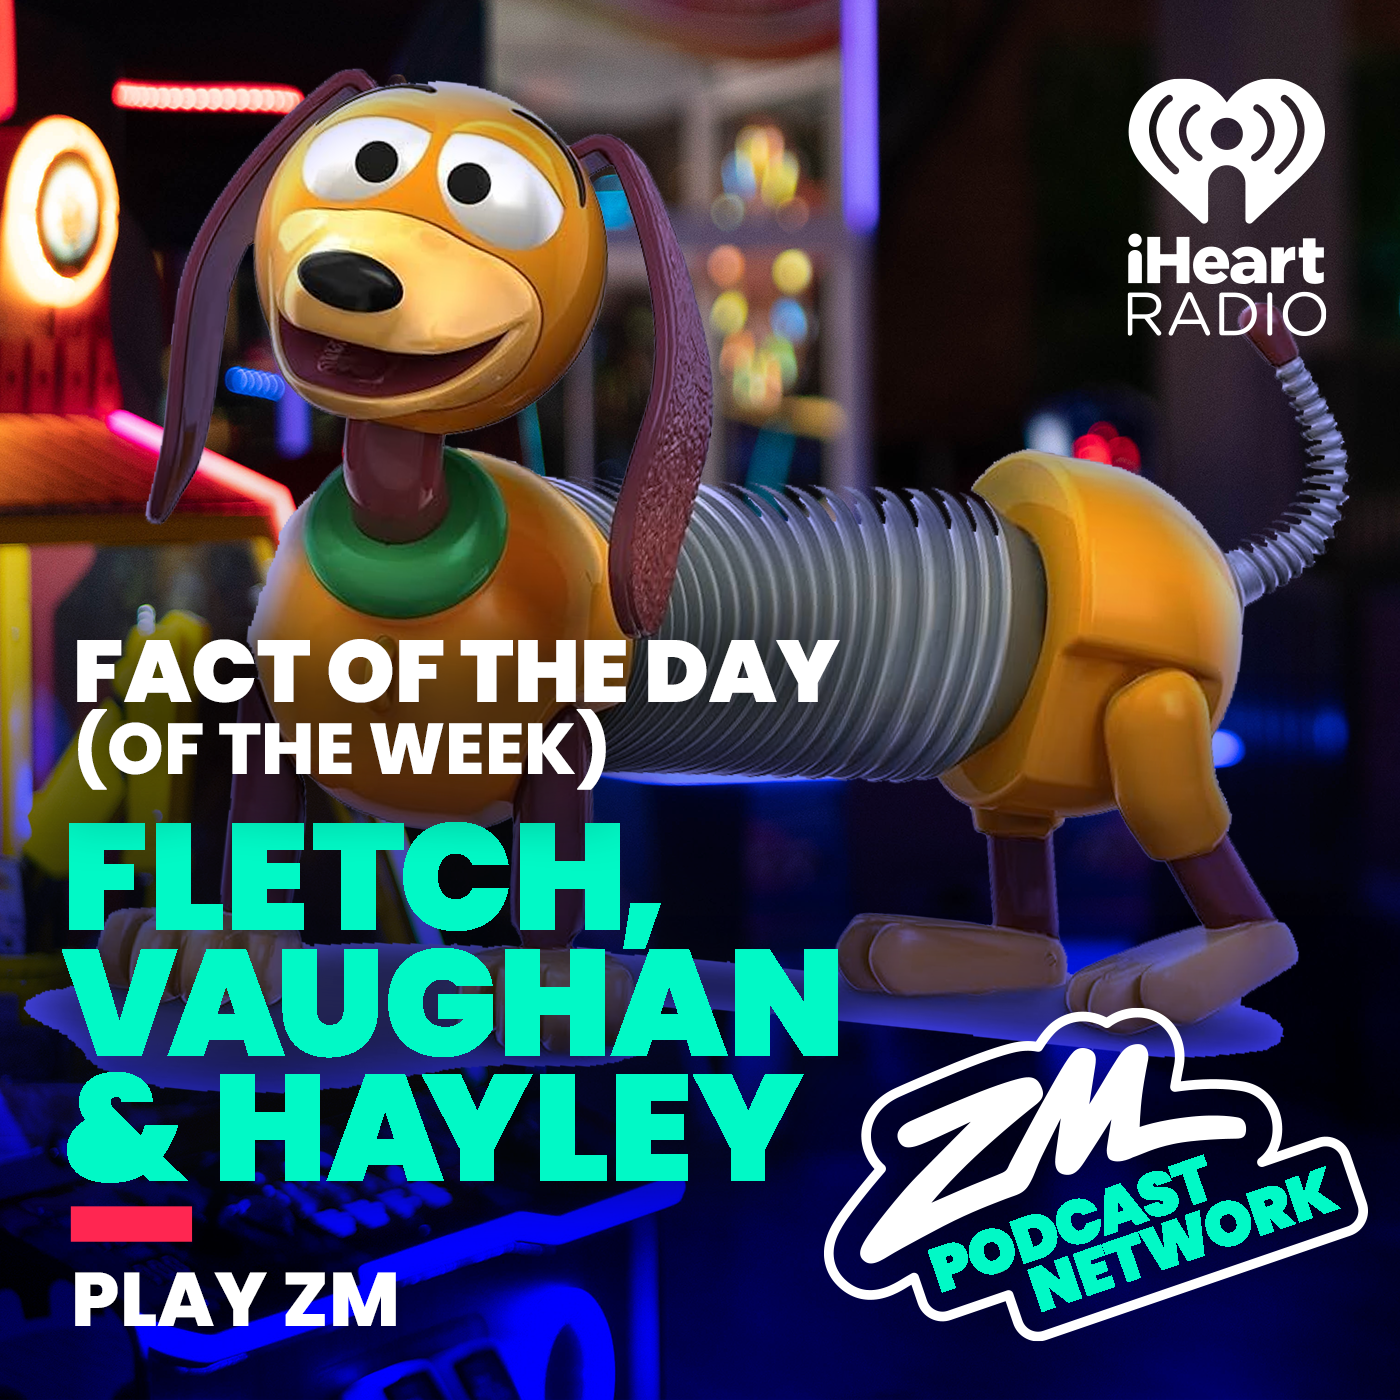 Fletch, Vaughan & Hayley's Fact of the Day (of the Week!) - Accidental Inventions!